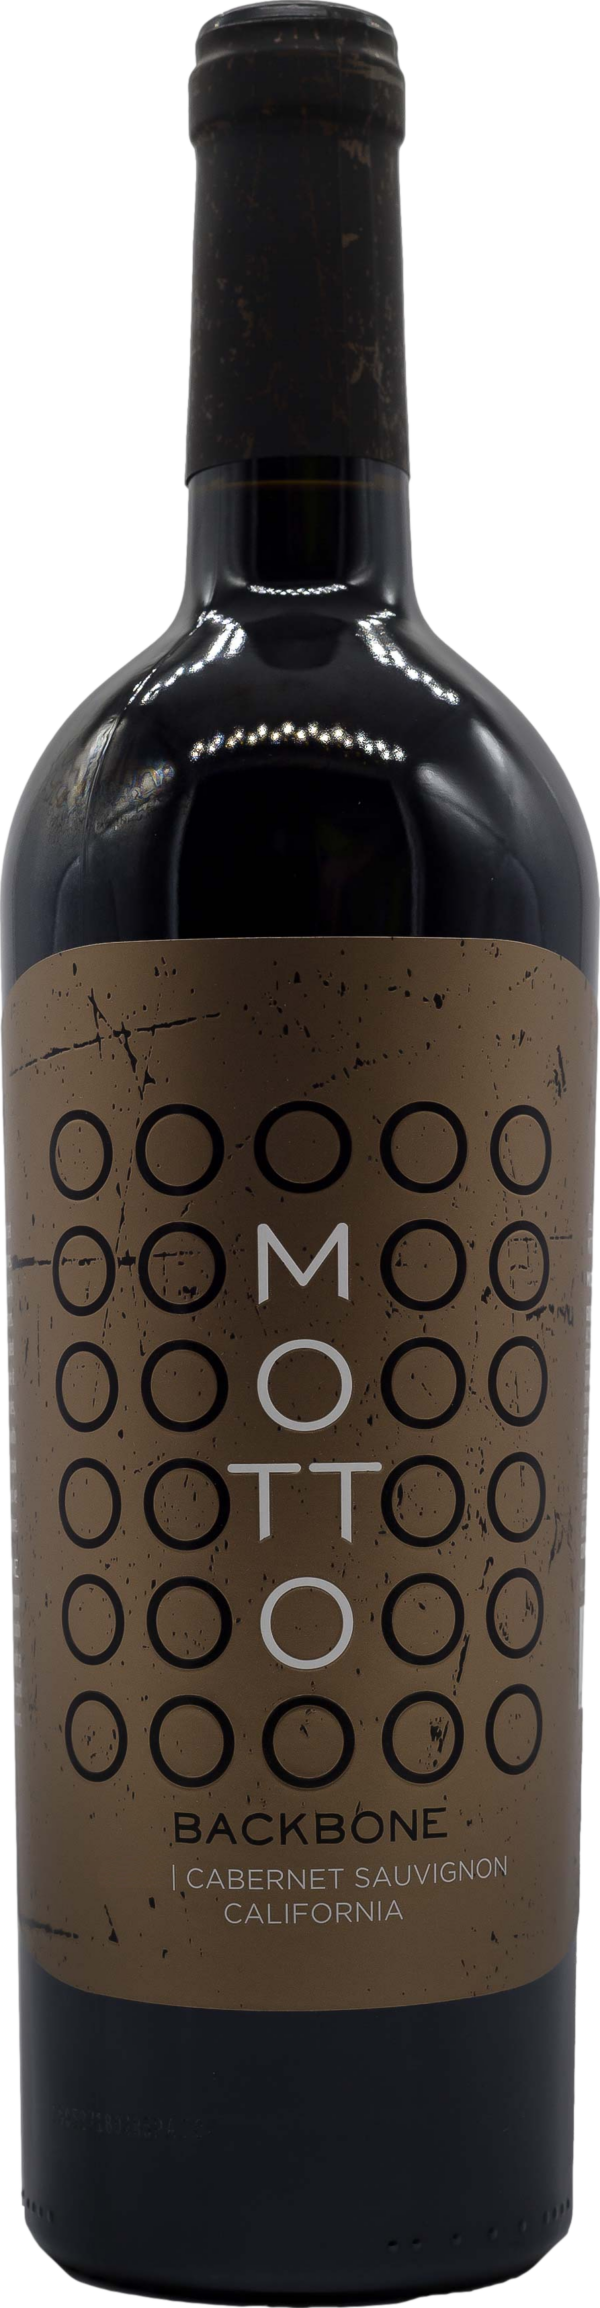 Product image of Motto Wines Cabernet Sauvignon Backbone 2017 from 8wines